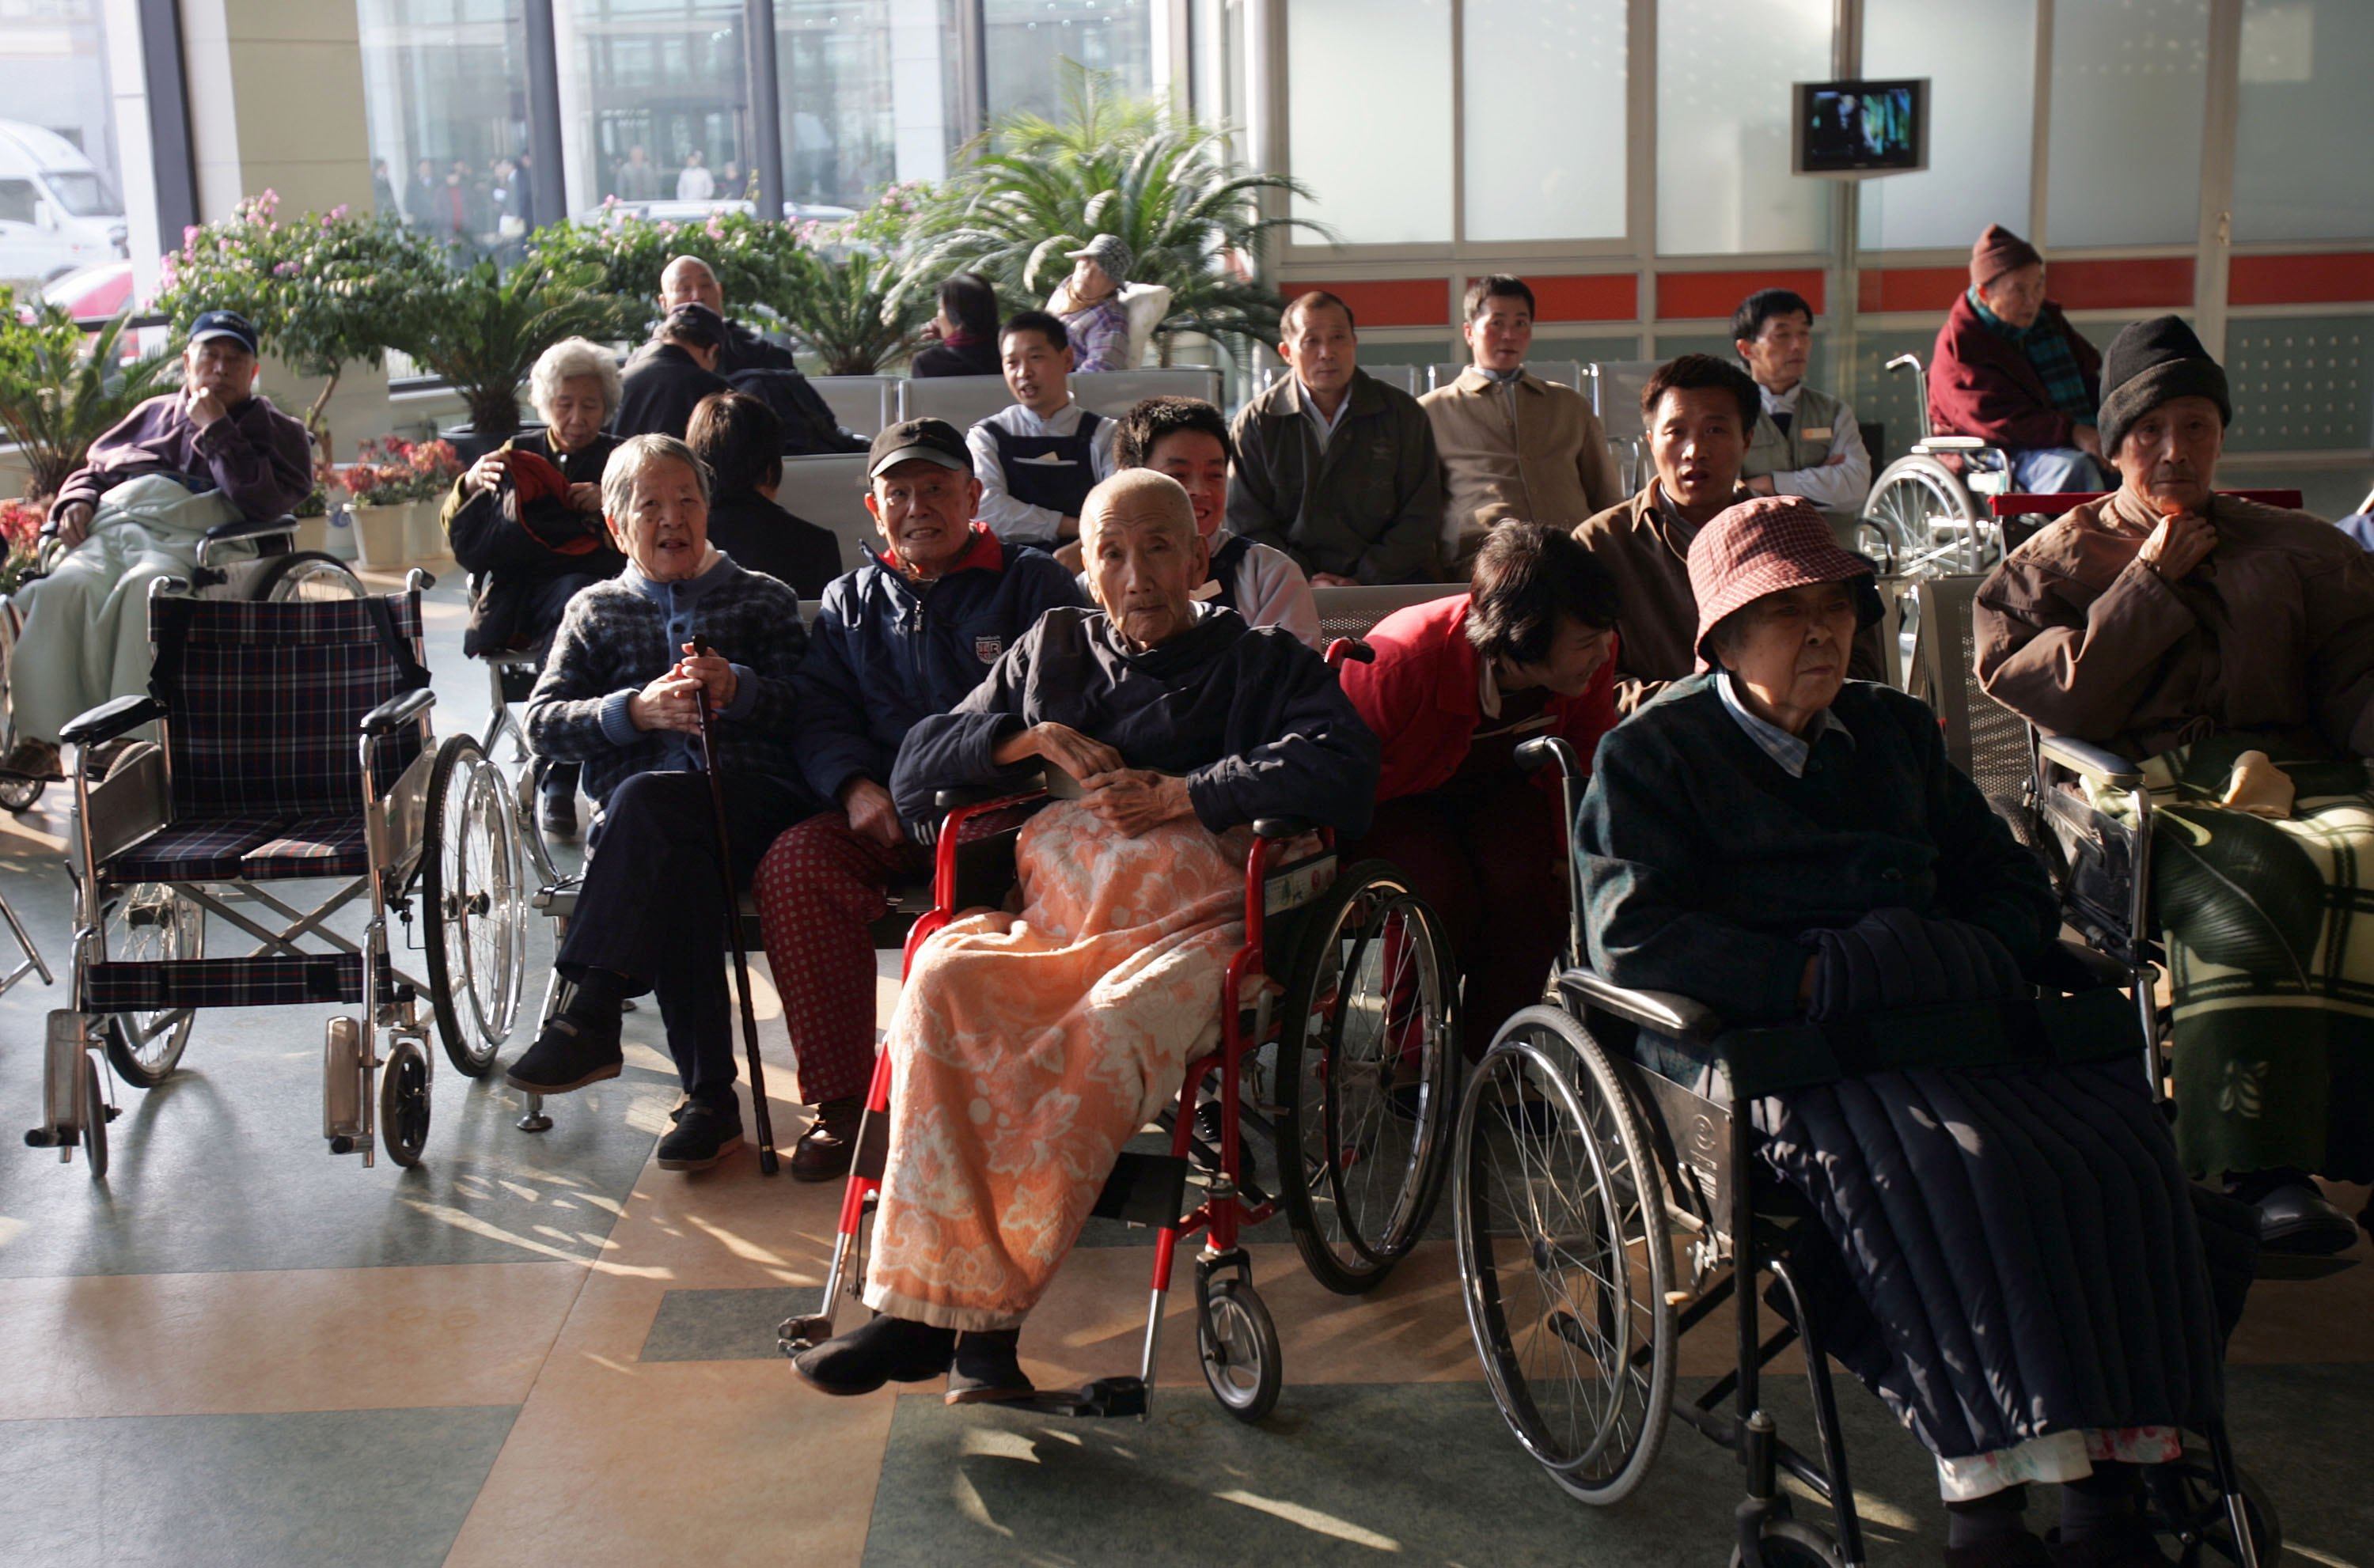 People older than 60 account for more than 20 per cent of residents in 13 of China’s 31 provincial-level jurisdictions. Photo: Getty Images